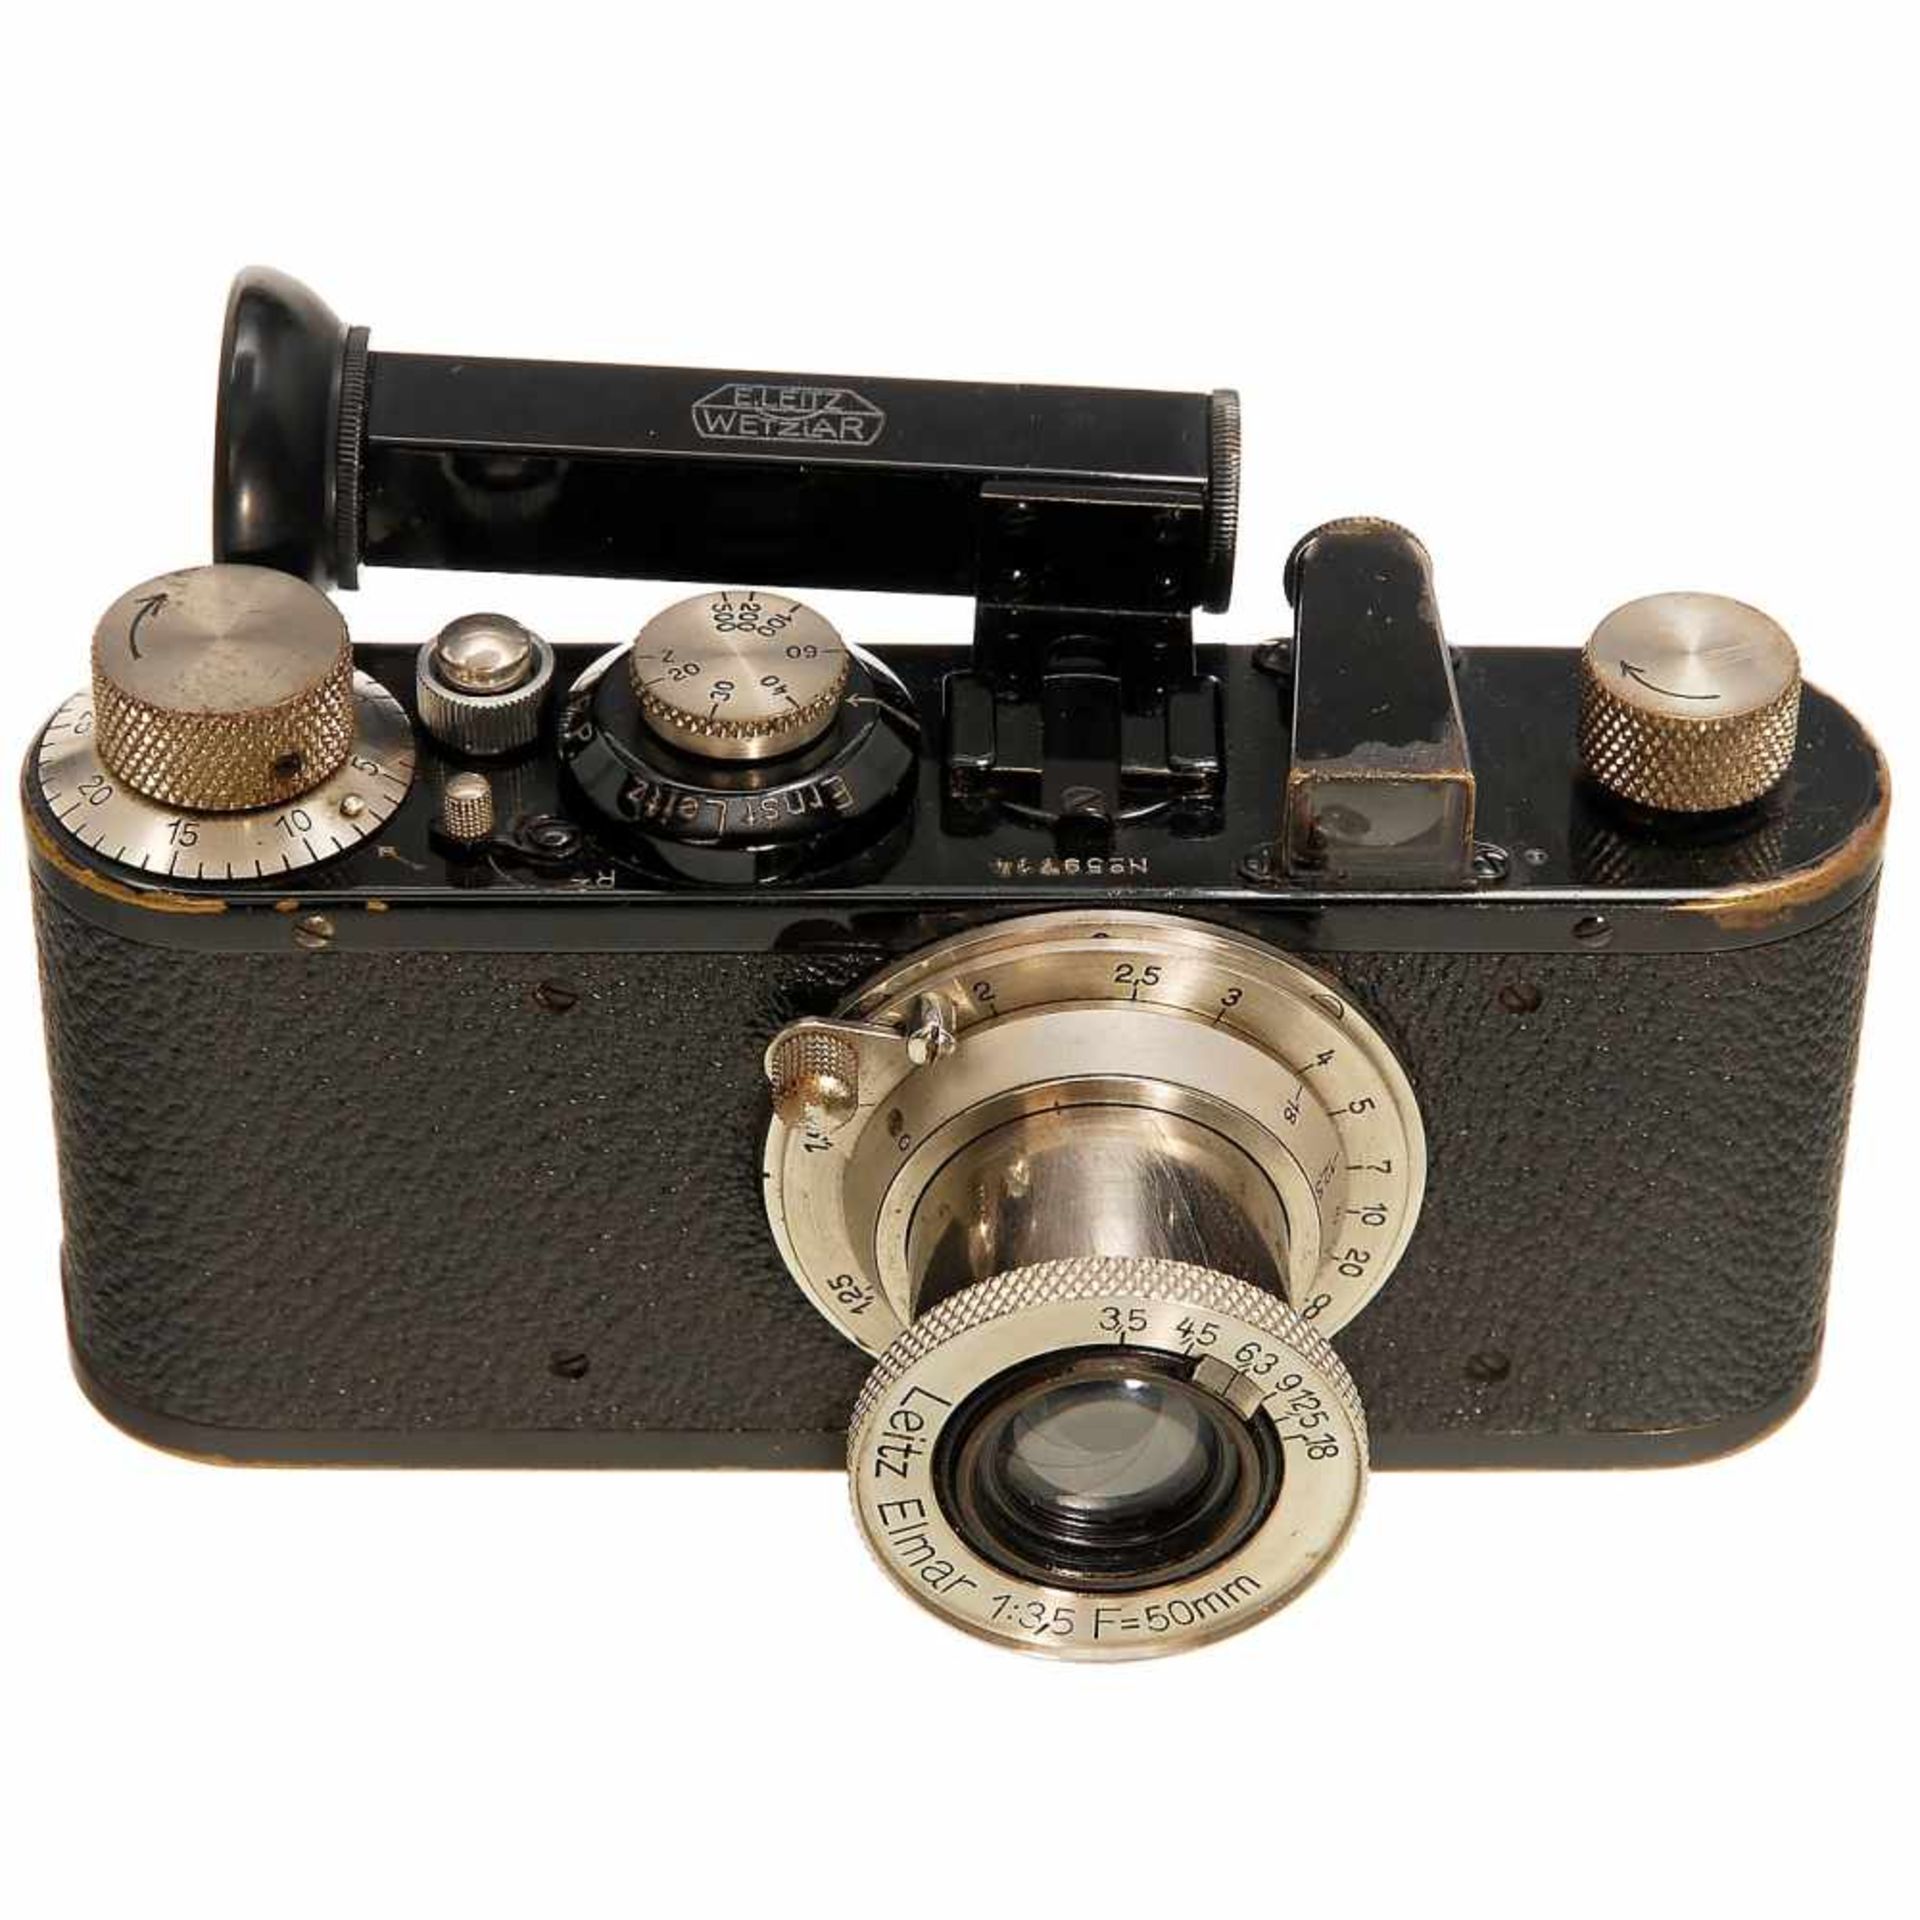 Leica I (A) Converted to I (C), 1931Leitz, Wetzlar. No. 59714, I (A) converted to I (C), with